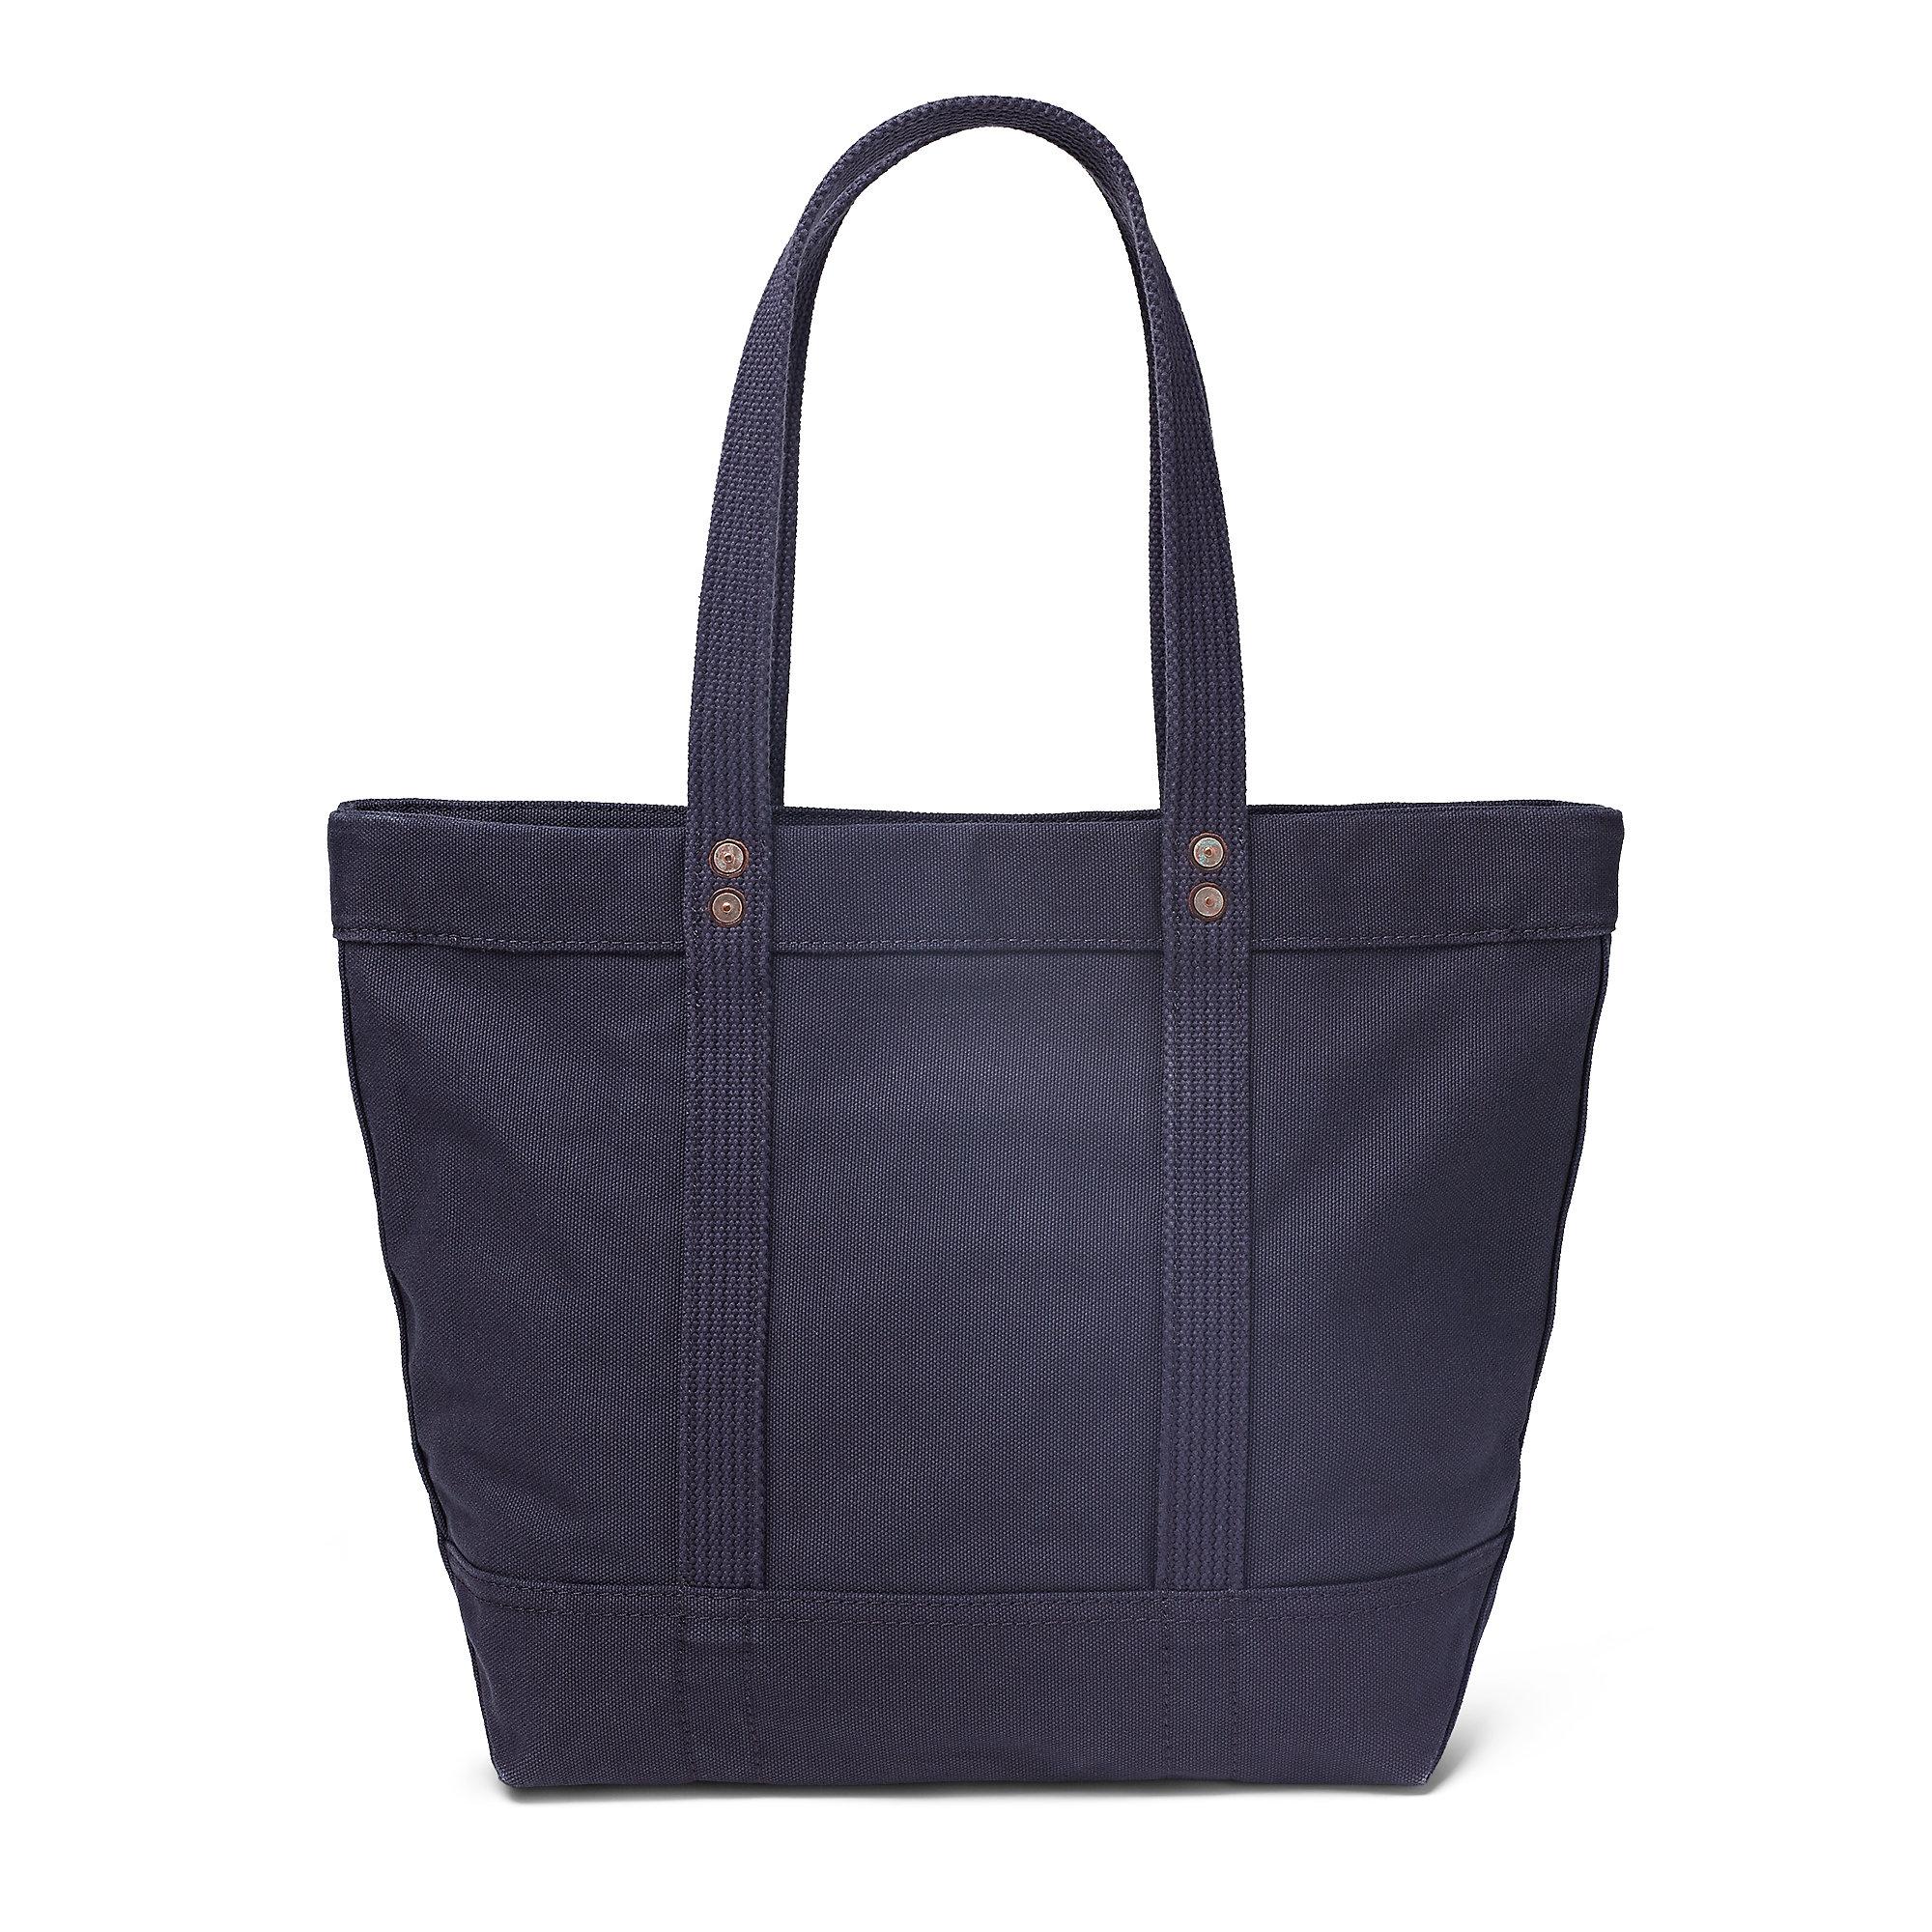 Polo Ralph Lauren Canvas Big Pony Tote in Navy (Blue) - Lyst